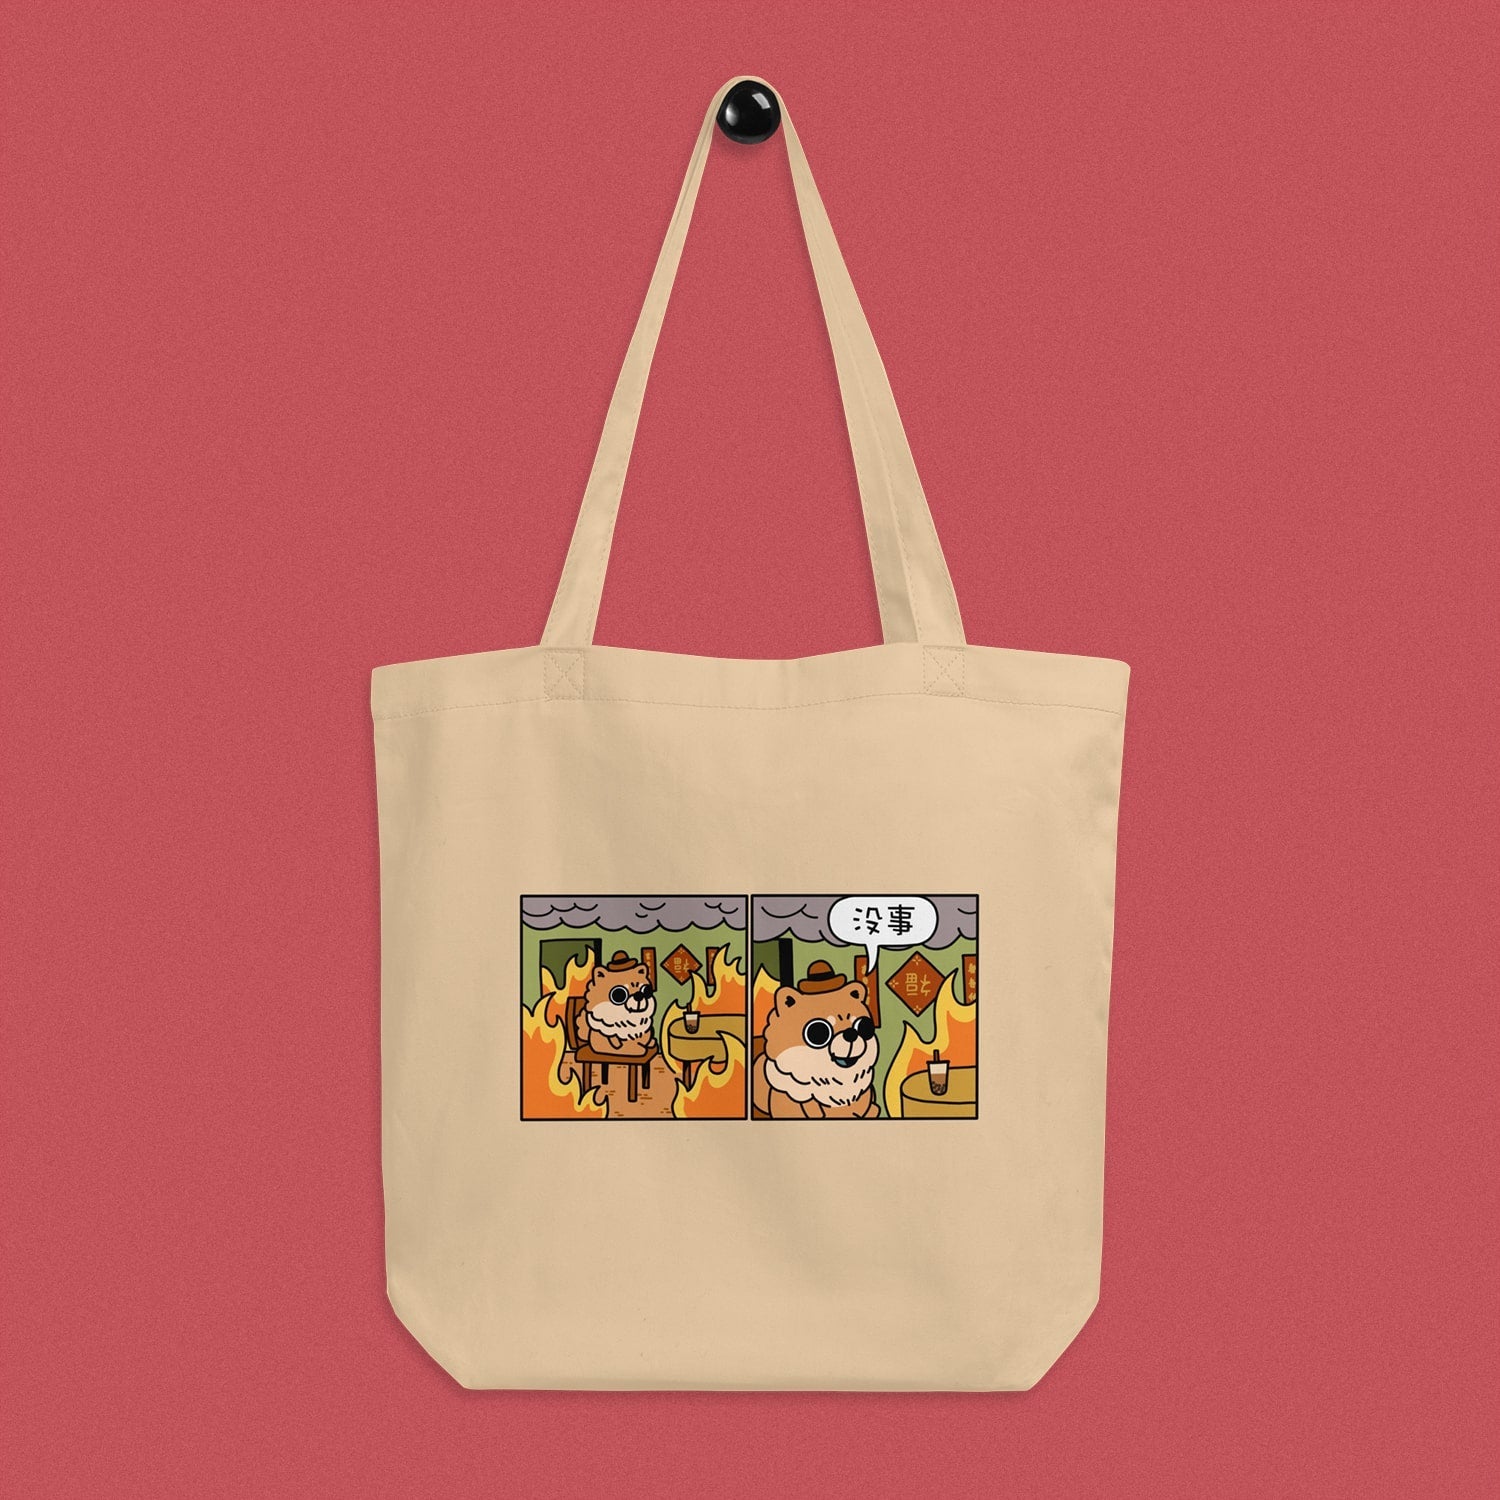 This Is Fine Tote Bag - Ni De Mama Chinese Clothing